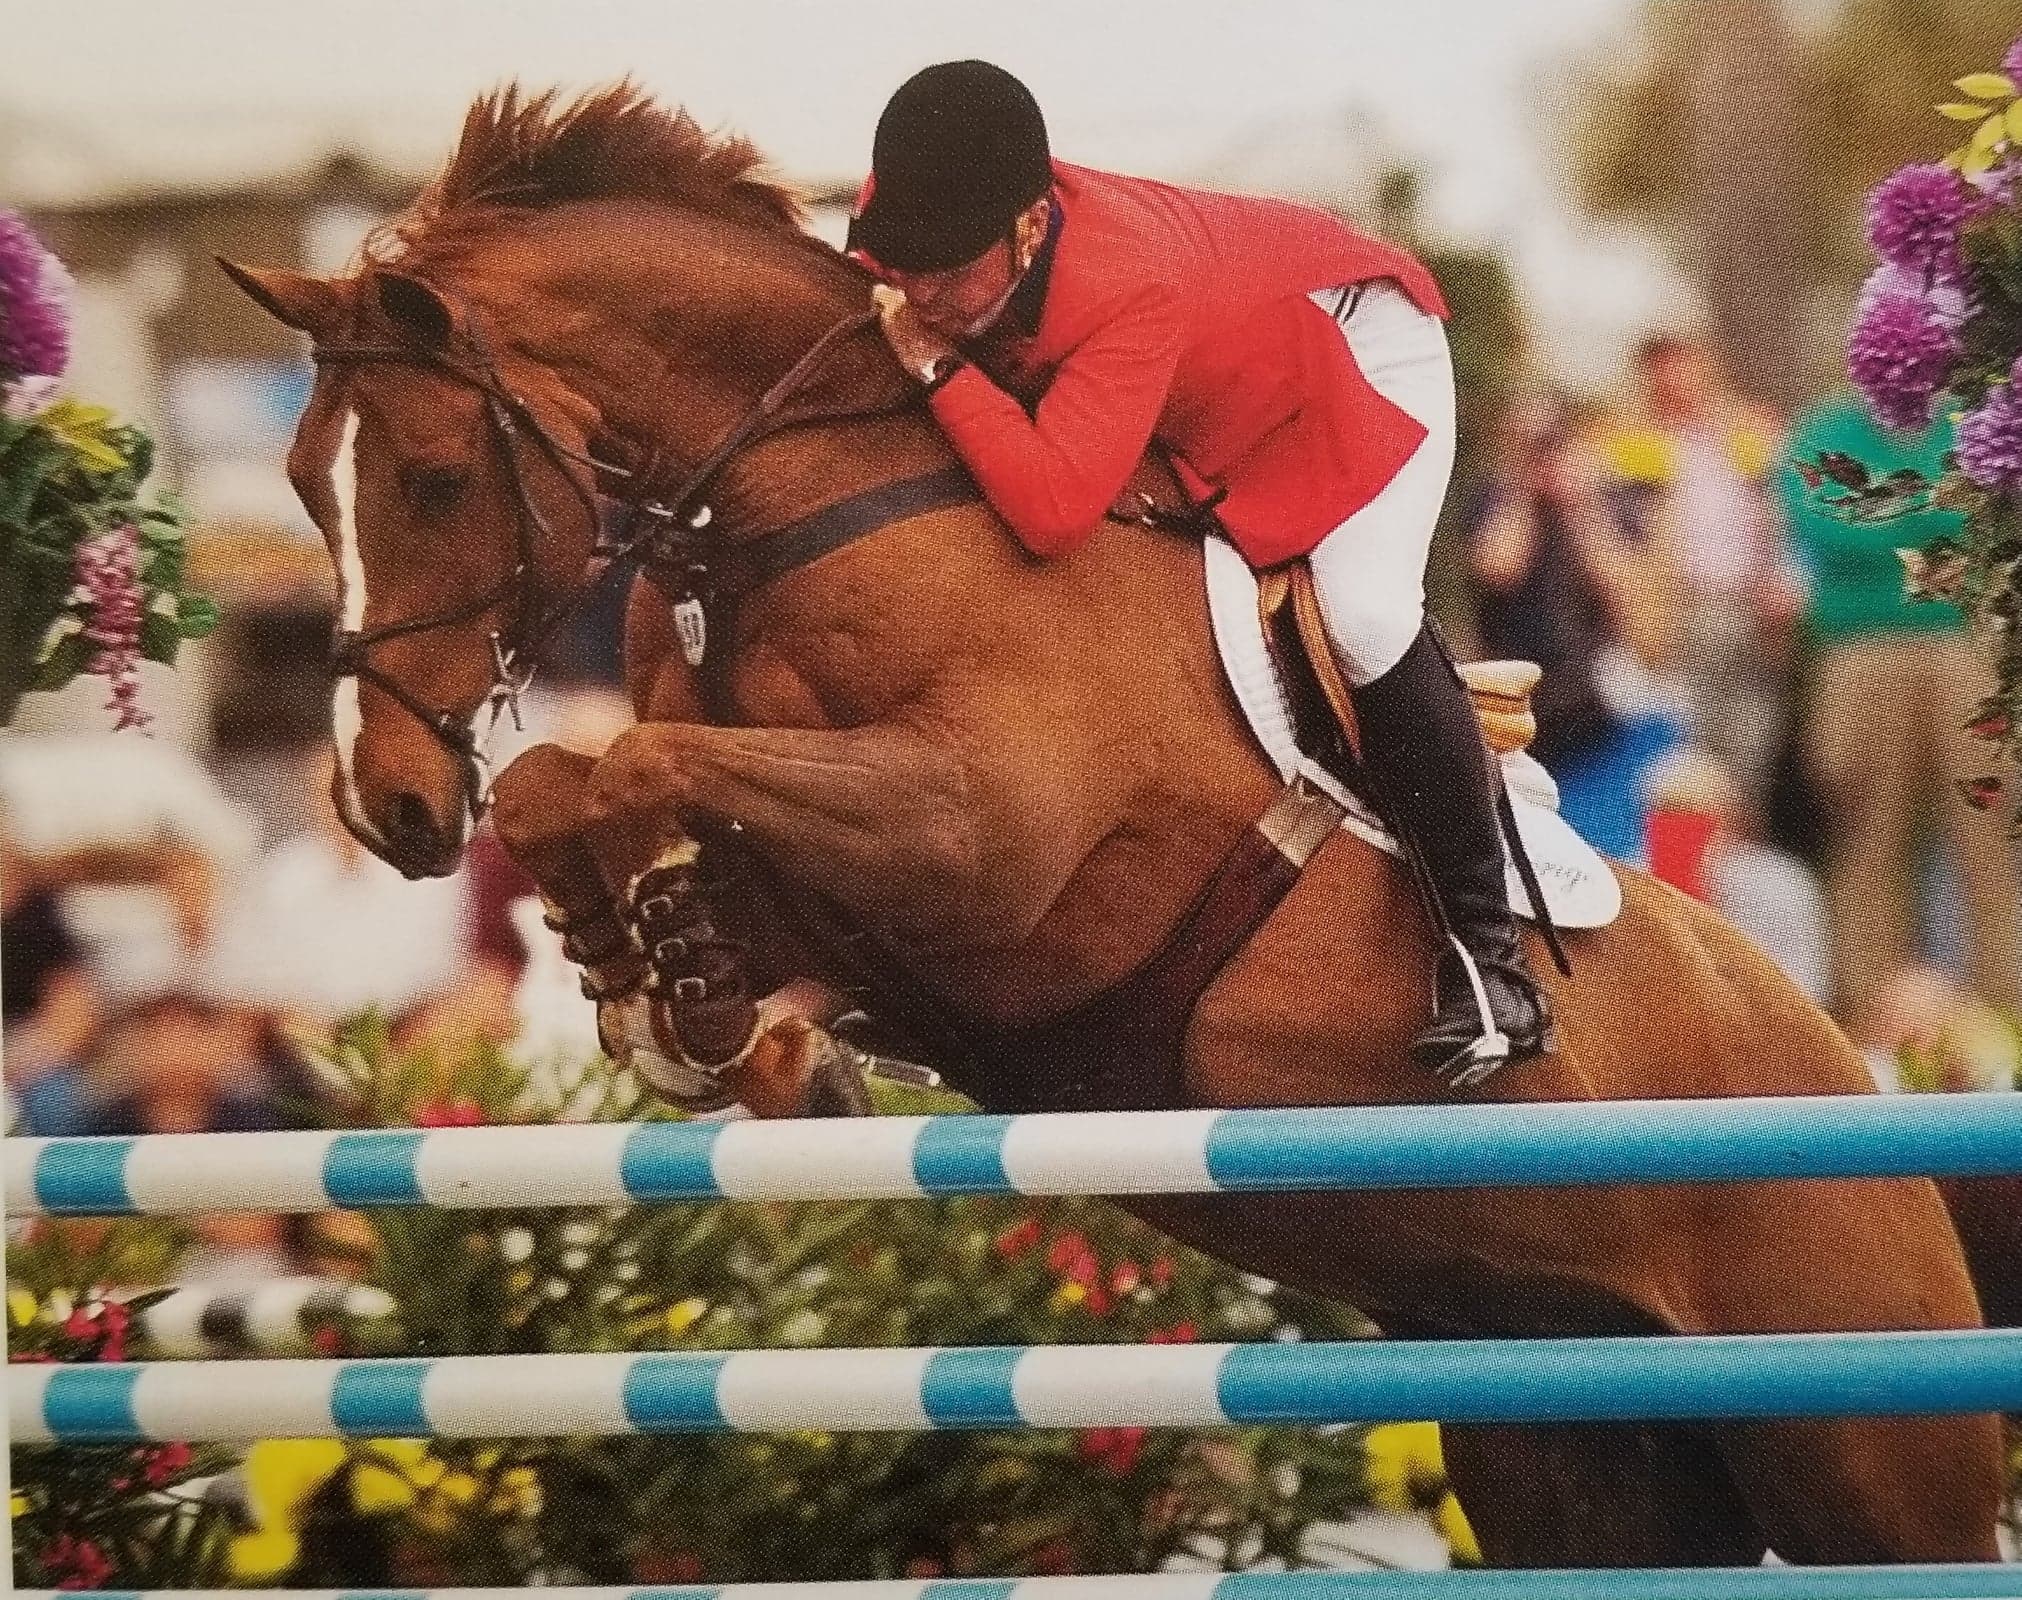 Norman Dello Joio & Glasgow at the NHS in 2002, where Norman was the Leading Jumper Rider and took the Open Jumper Championship